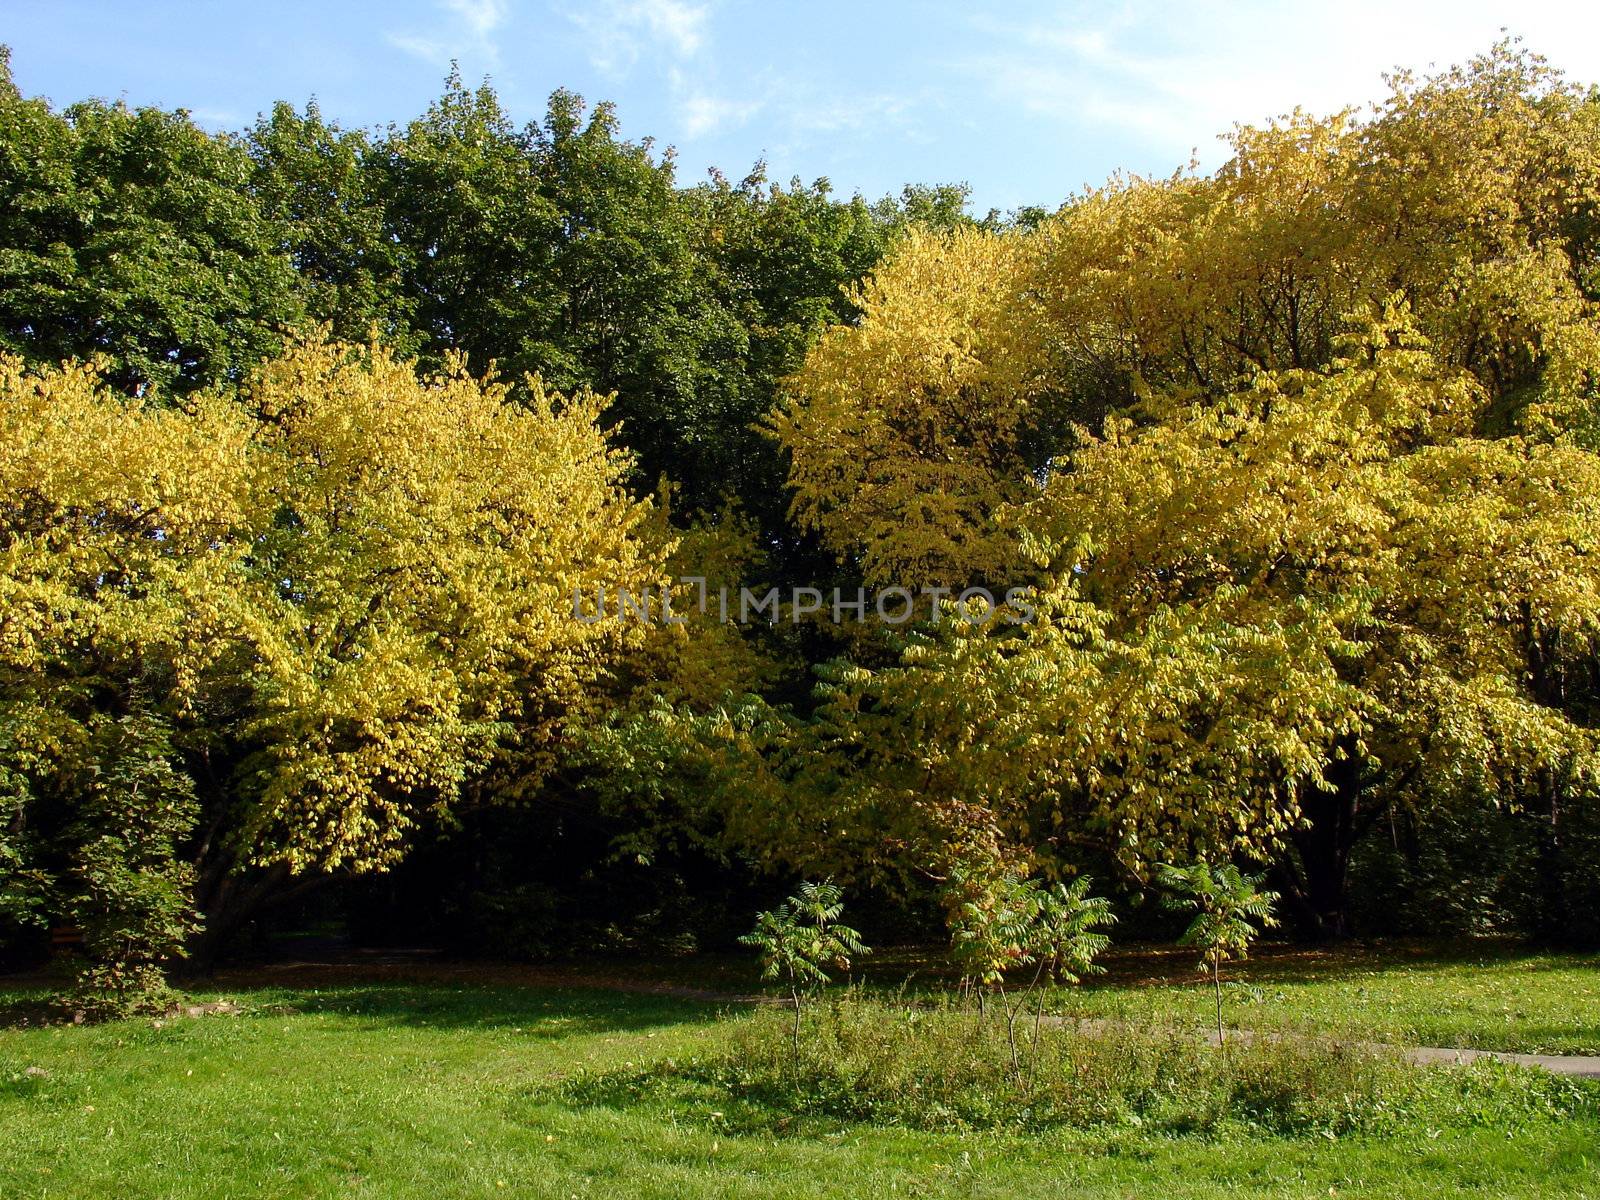 Golden autumn landscape with yellow trees